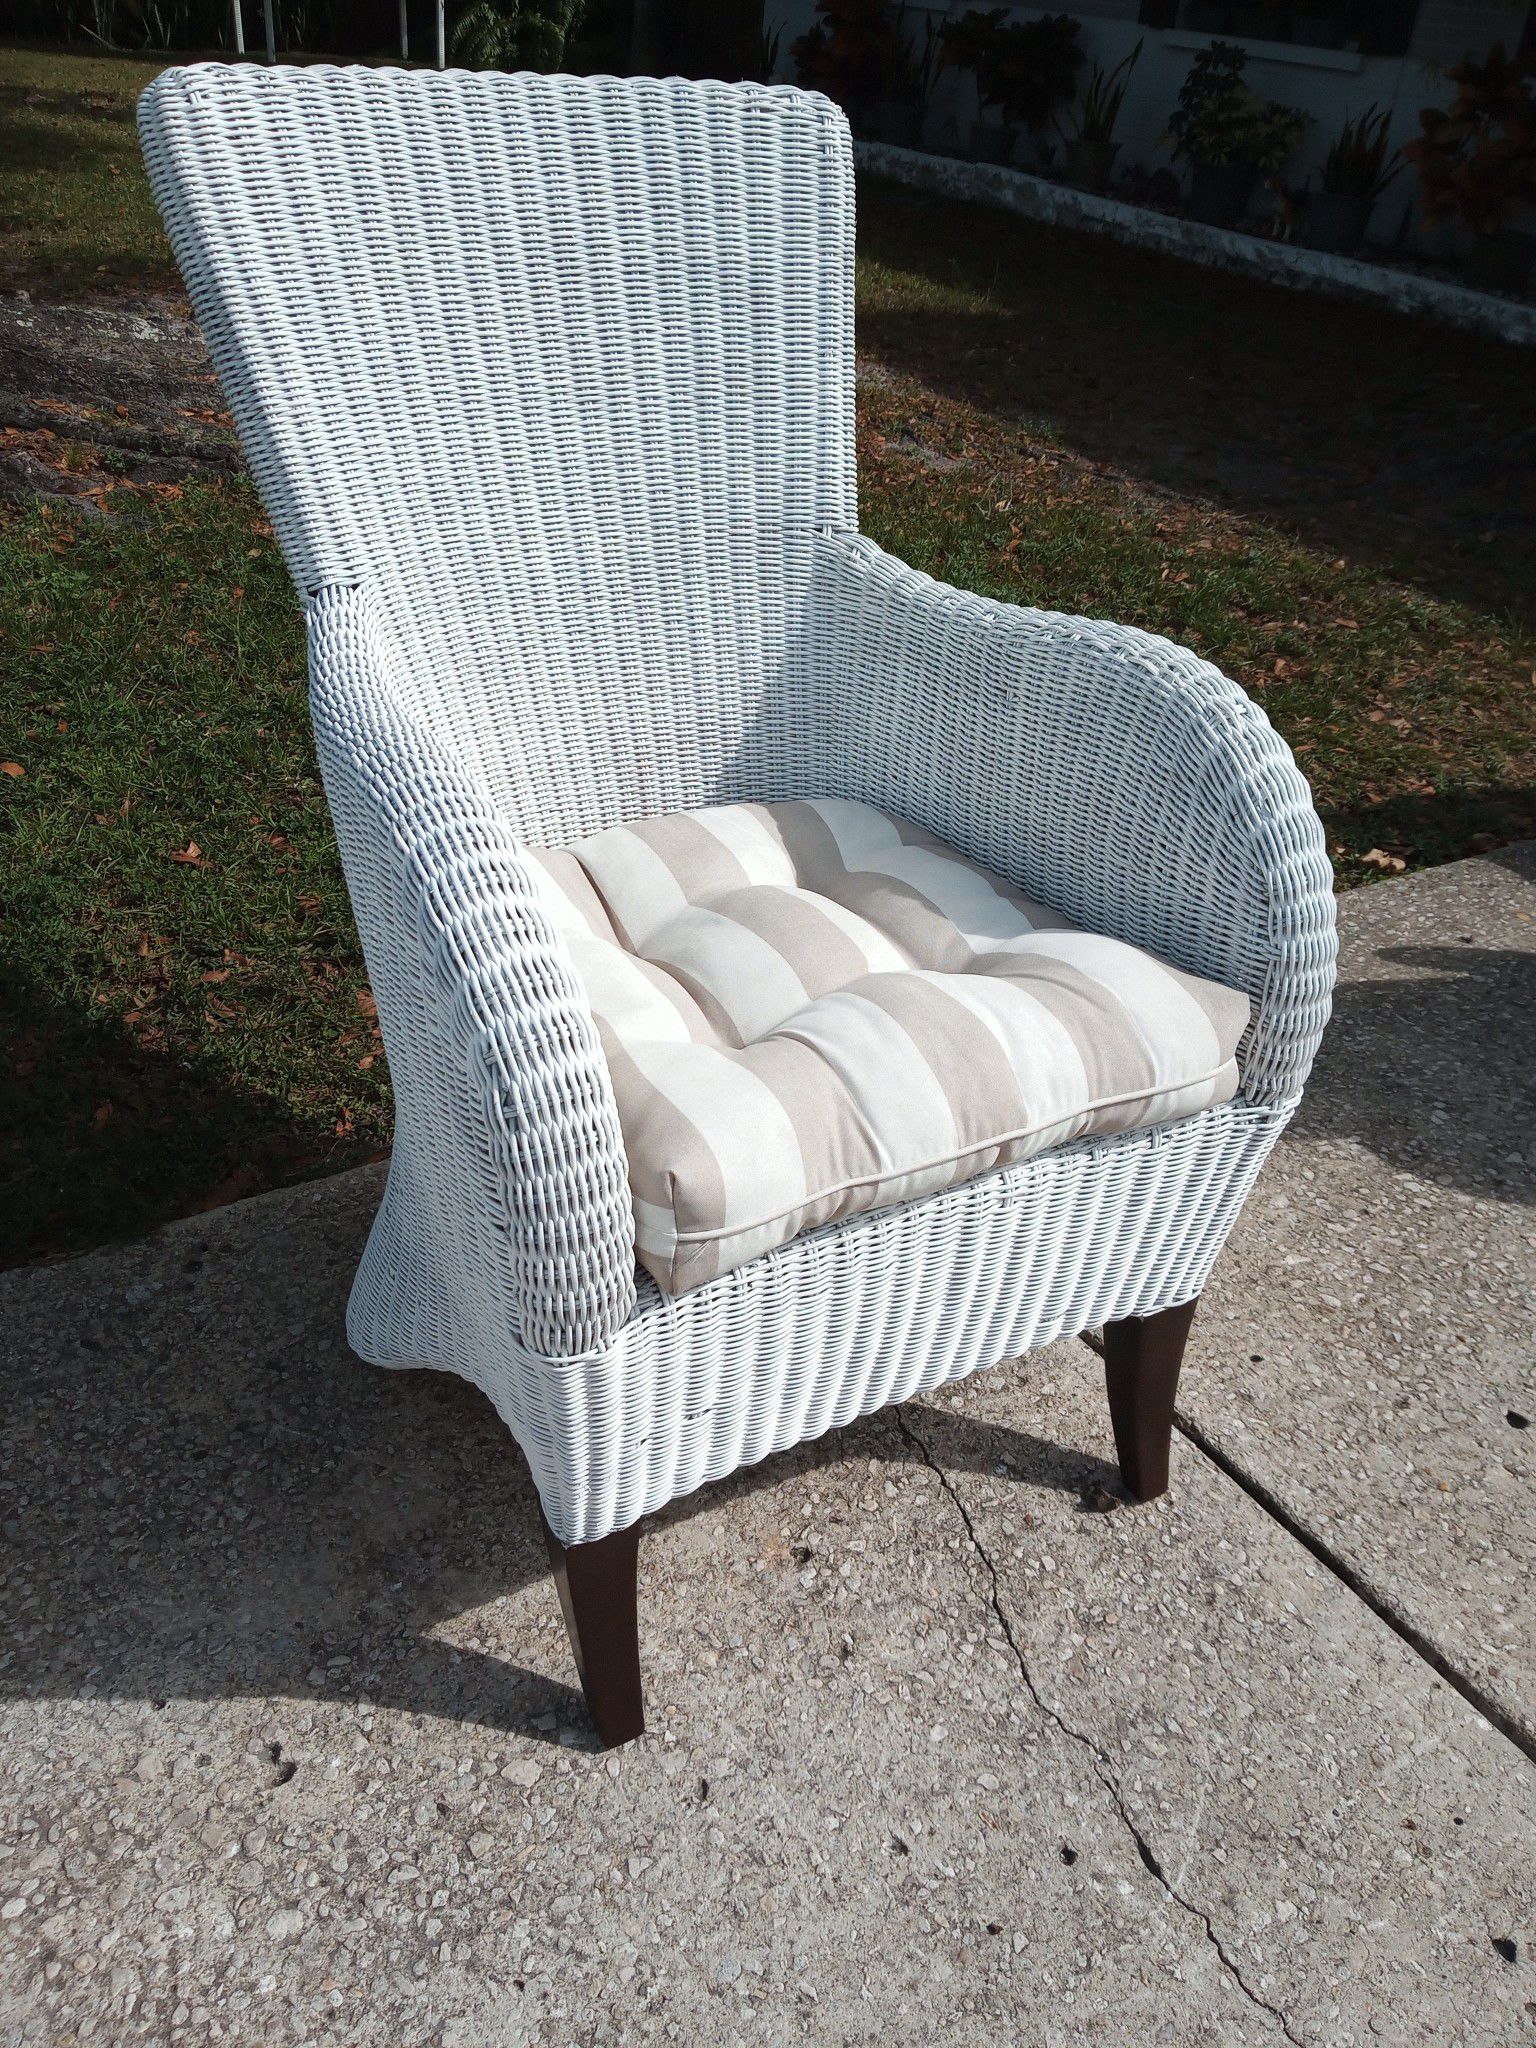 Set of Wicker Club Chairs